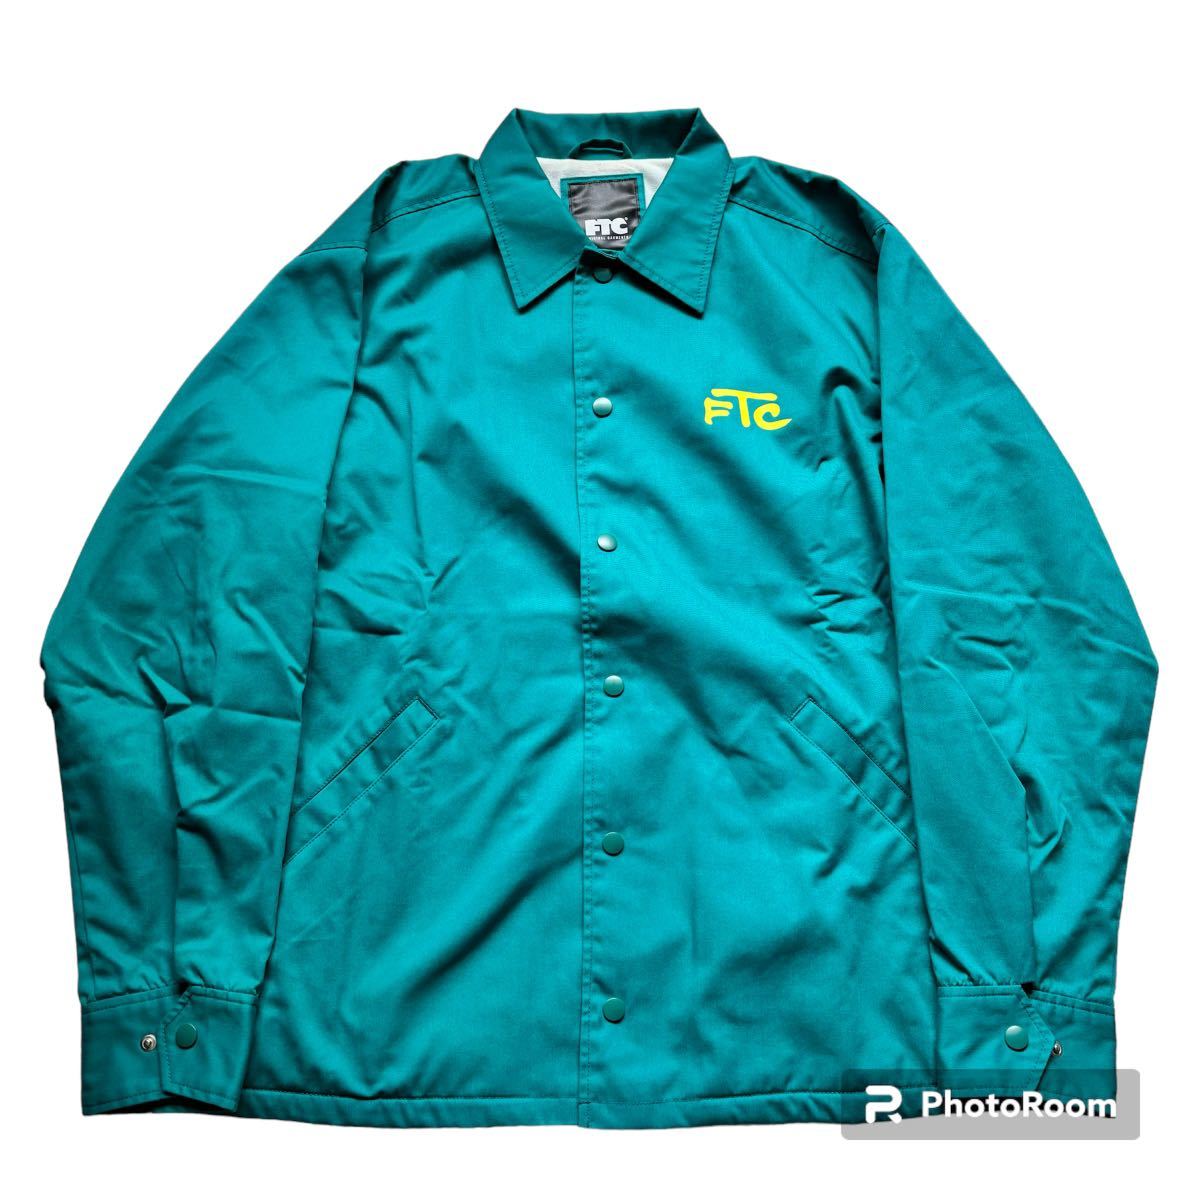 FTC / エフティーシーWITH A GIRL COACH JACKET 古着_画像2